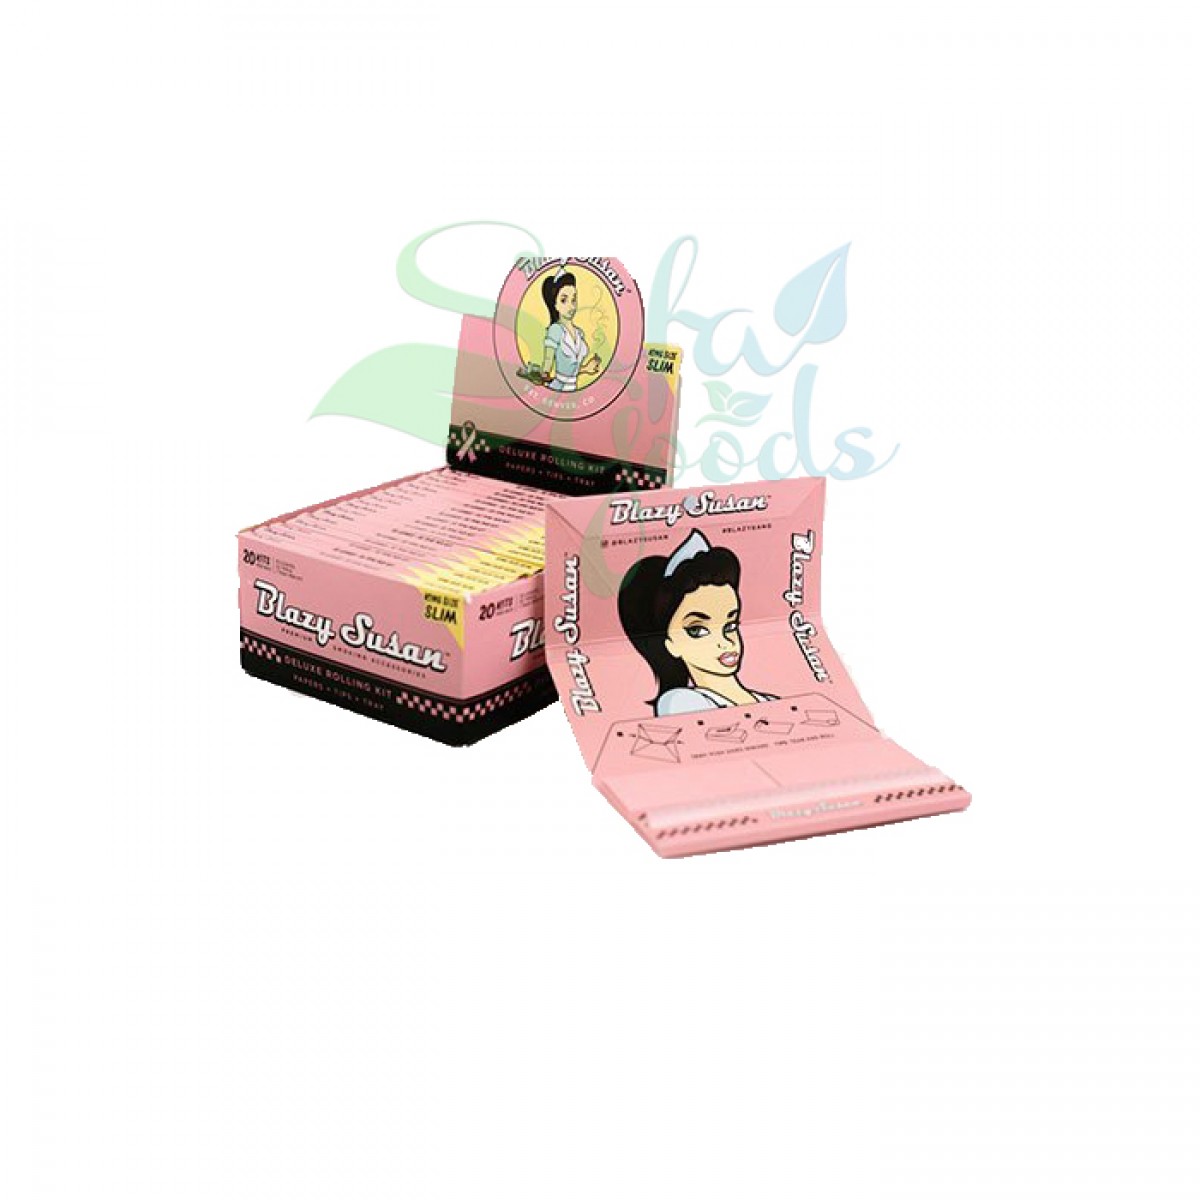 Blazy Susan - Pink Rolling Papers - King Size Deluxe 